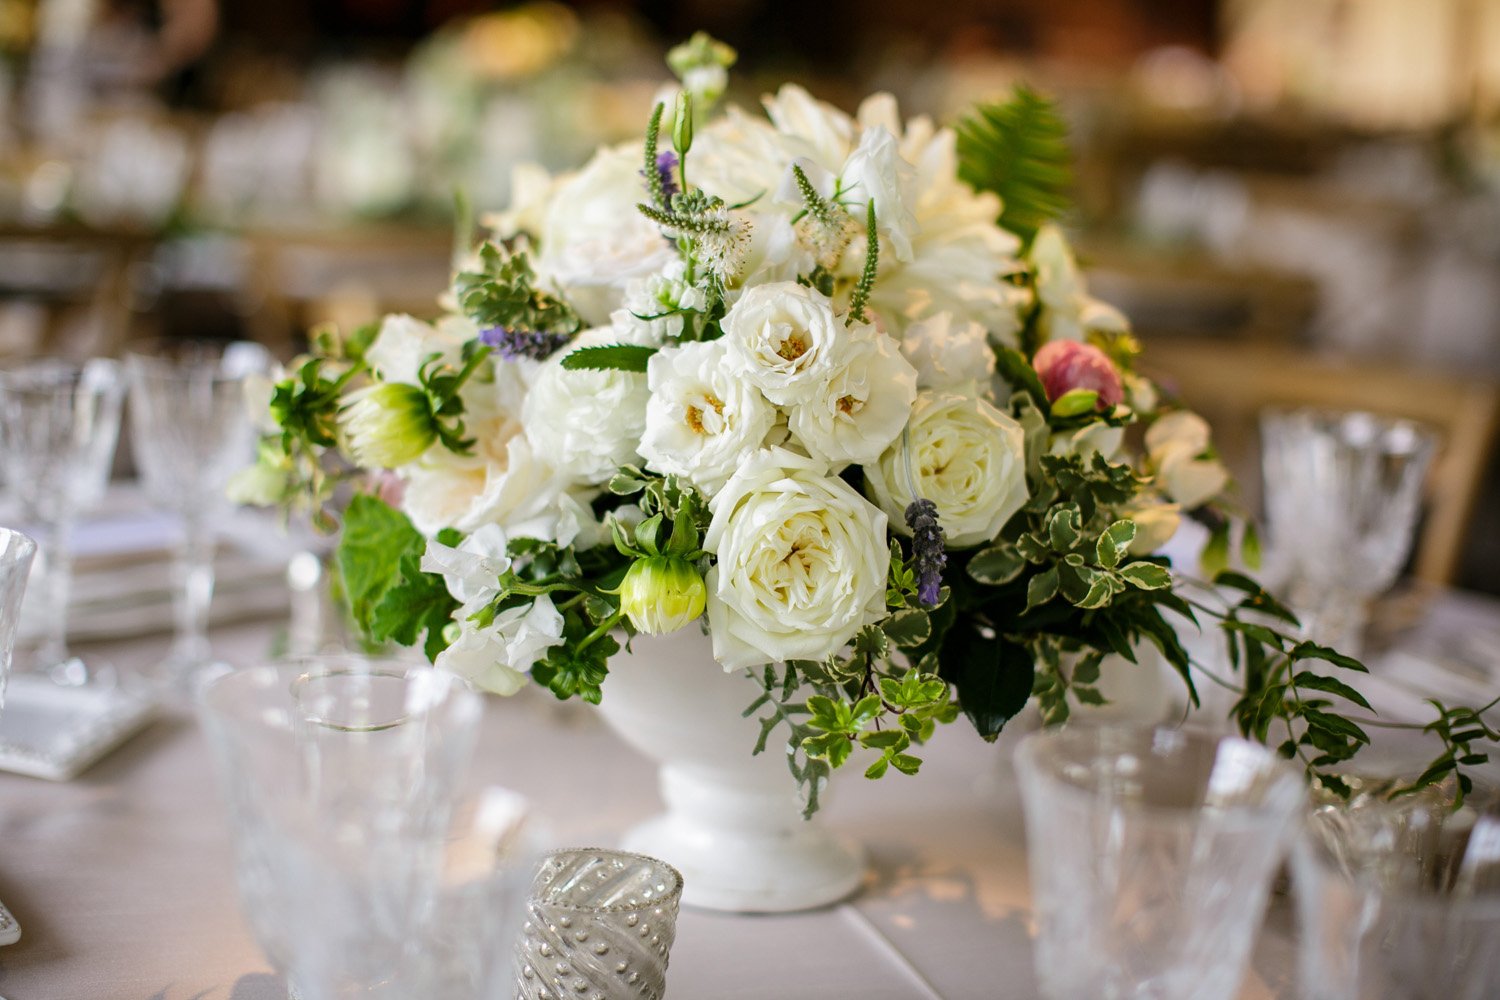 www.santabarbarawedding.com | Cody Floral Design | Classic White and Lavender Floral Centerpiece